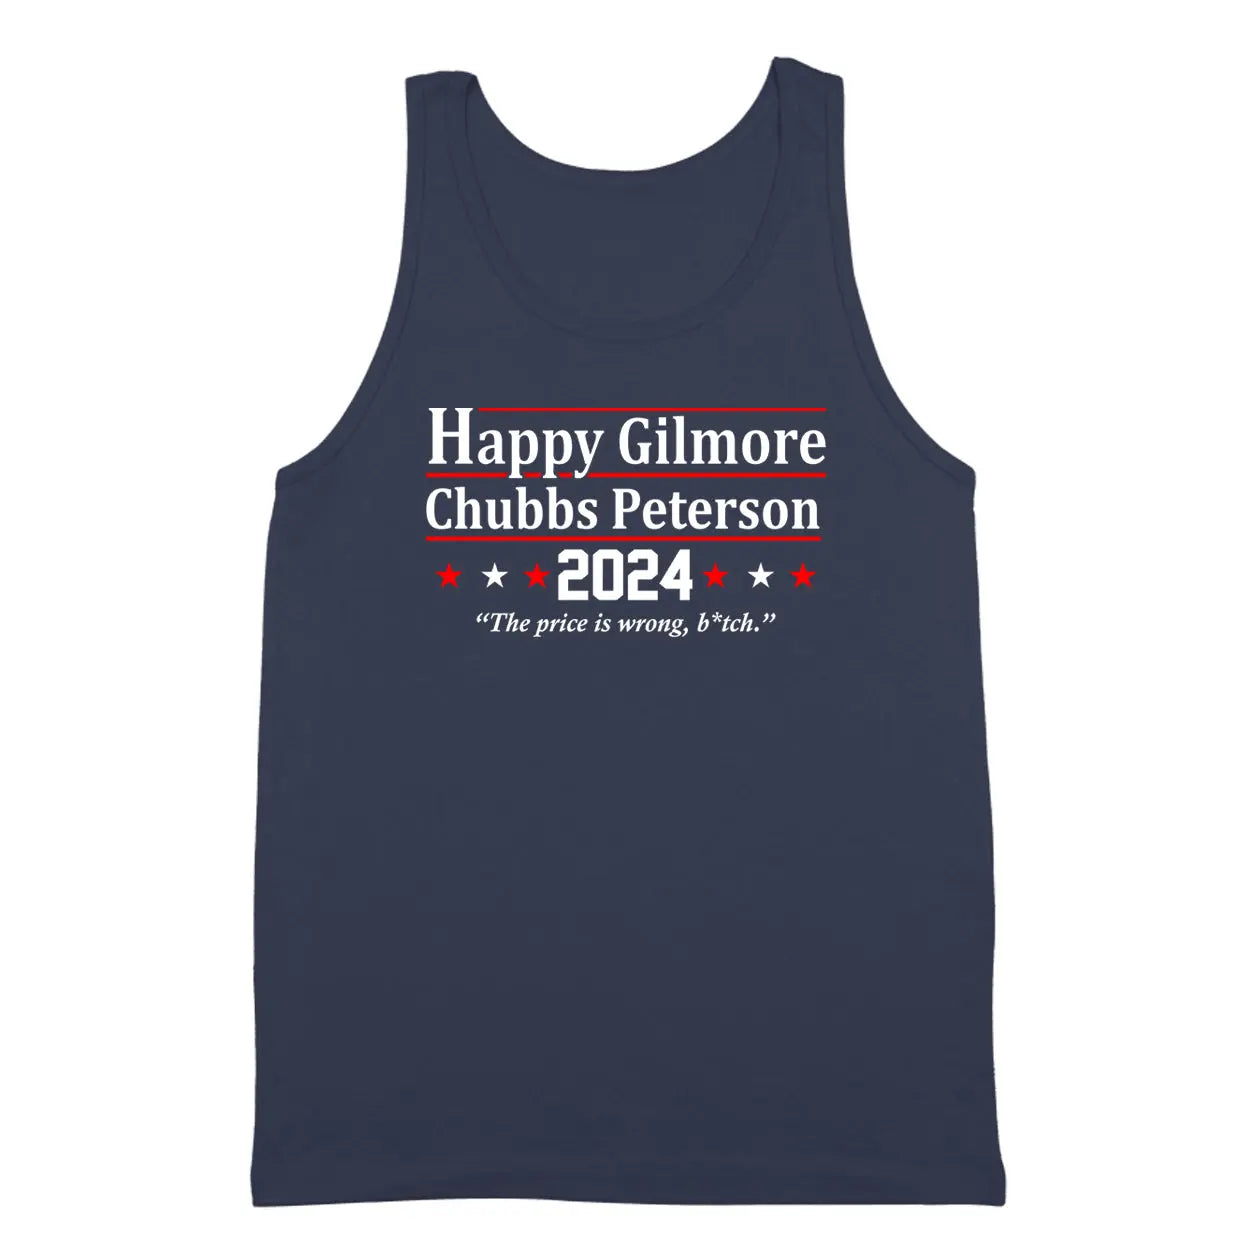 Happy Gilmore Chubbs Peterson 2024 Election Tshirt - Donkey Tees